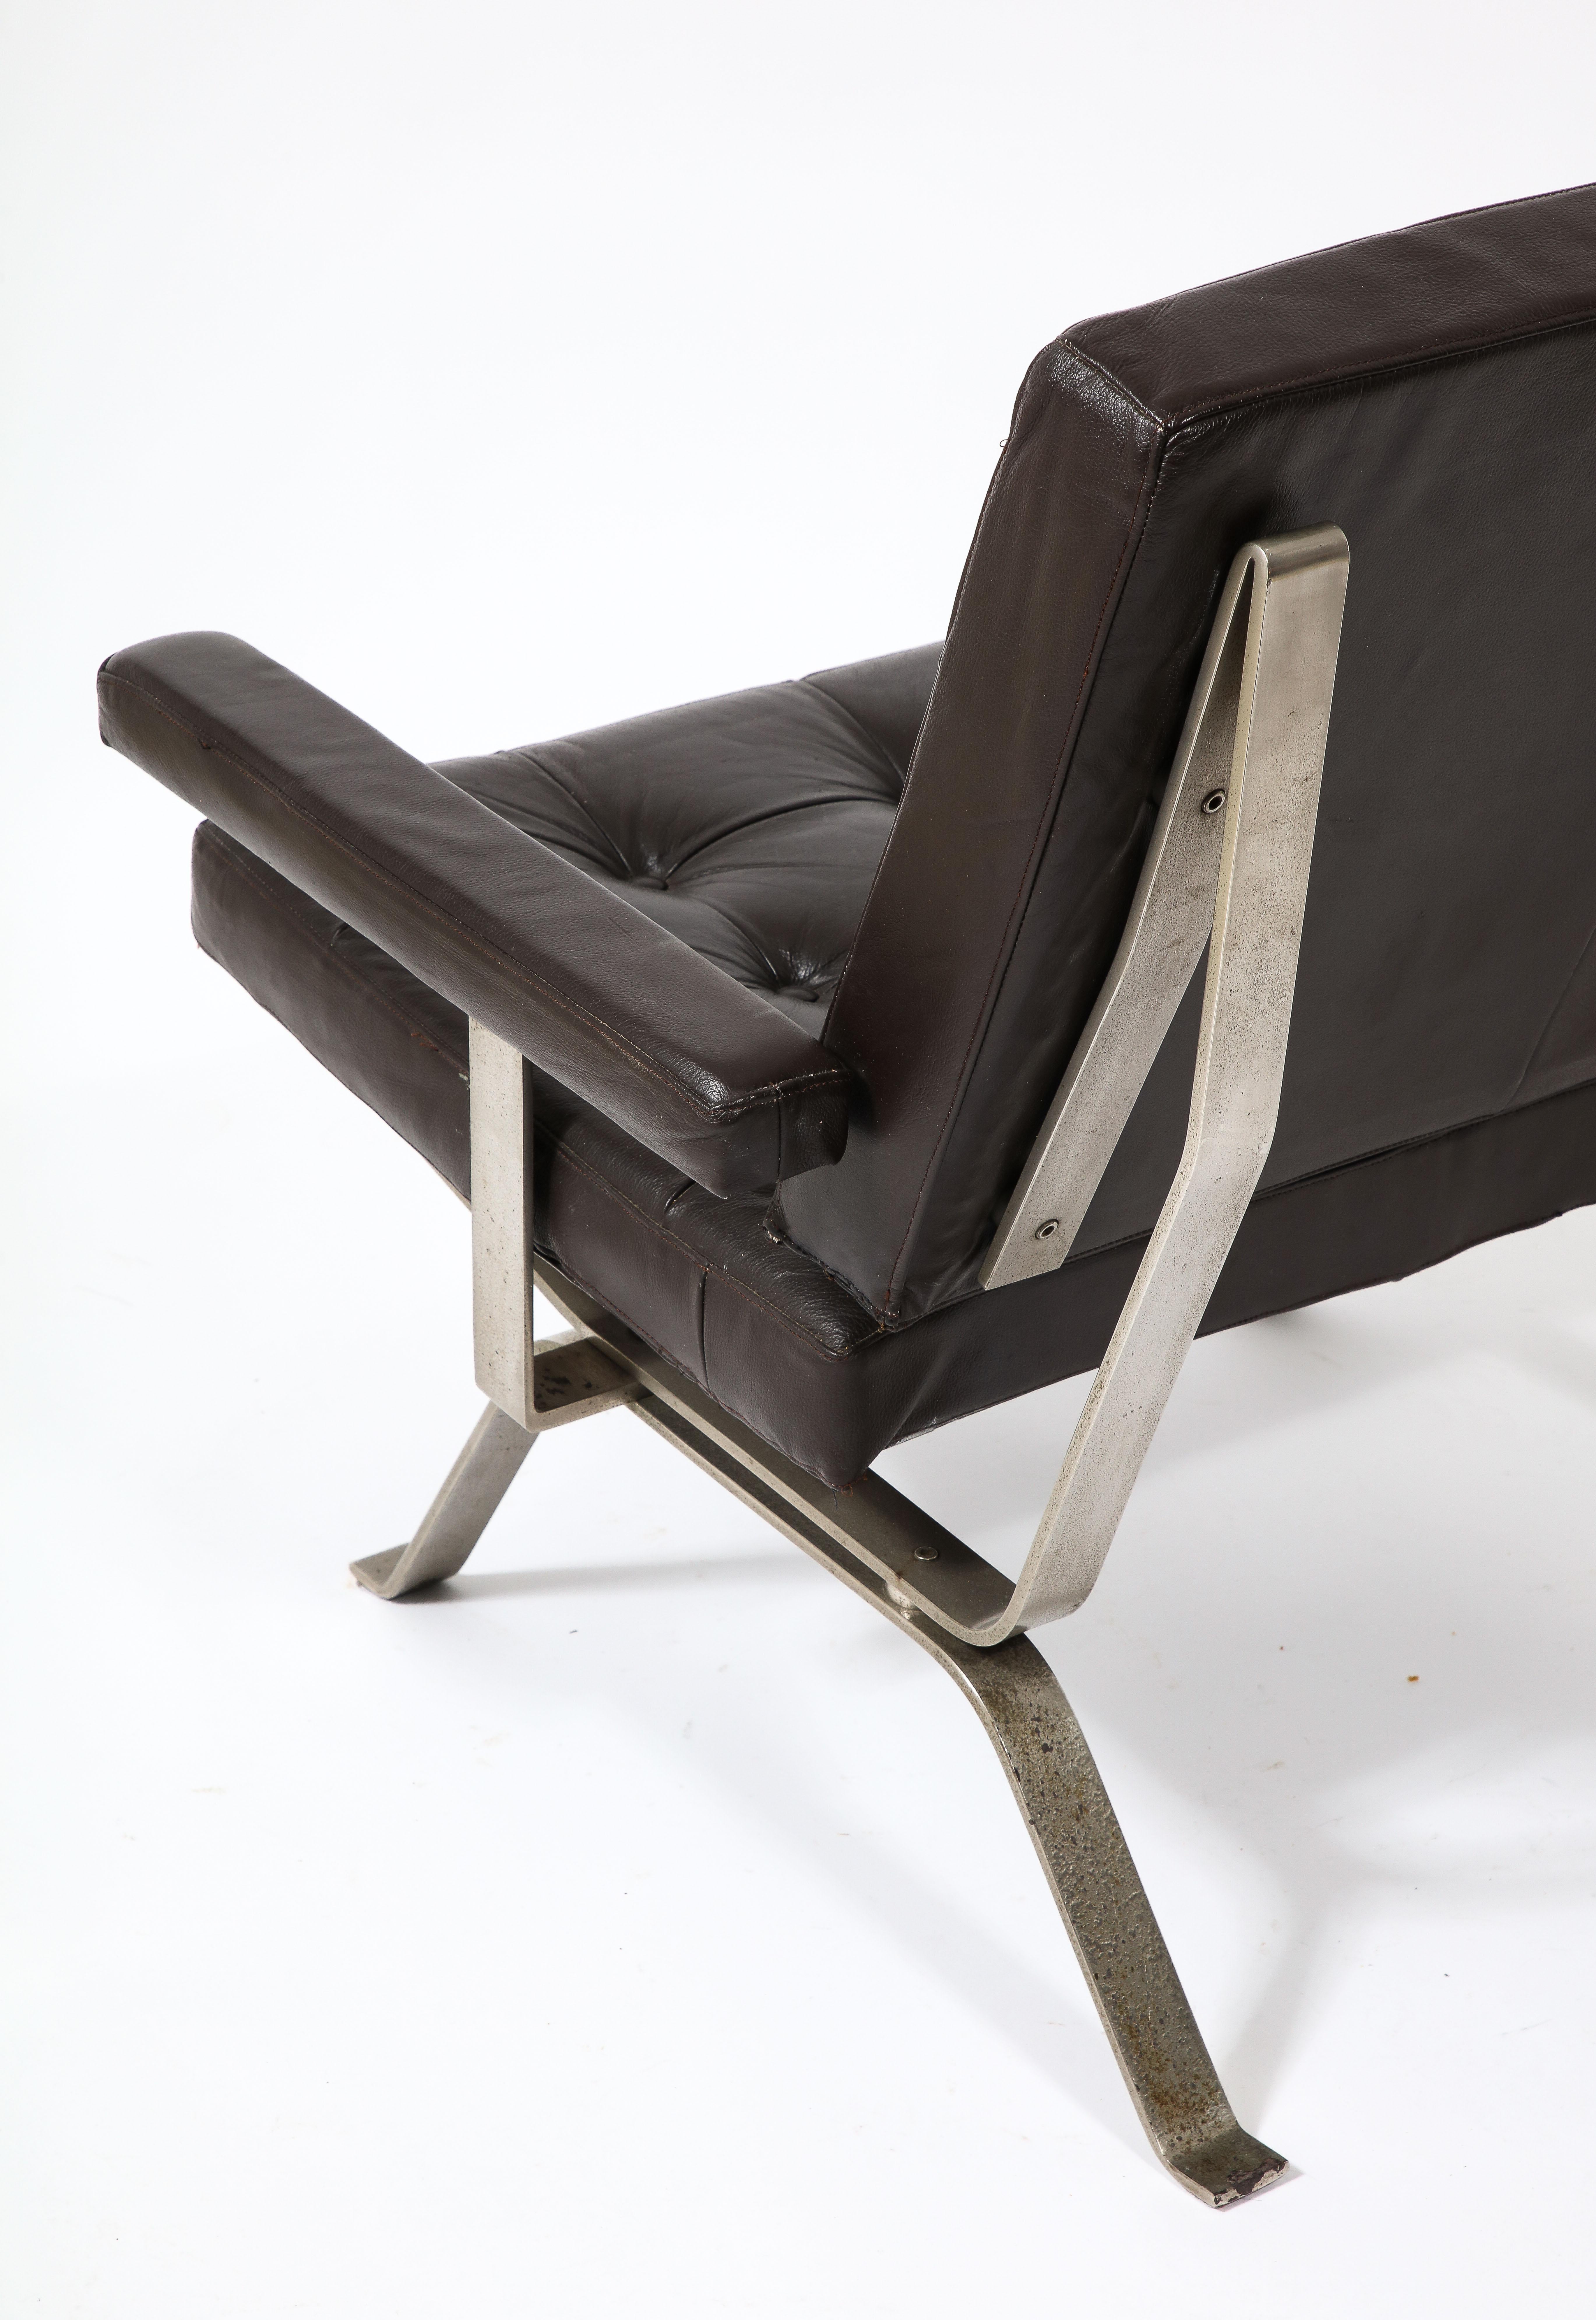 20th Century Bauhaus Style Visitor Lounge Chair in Black Leather, Germany 1960's For Sale